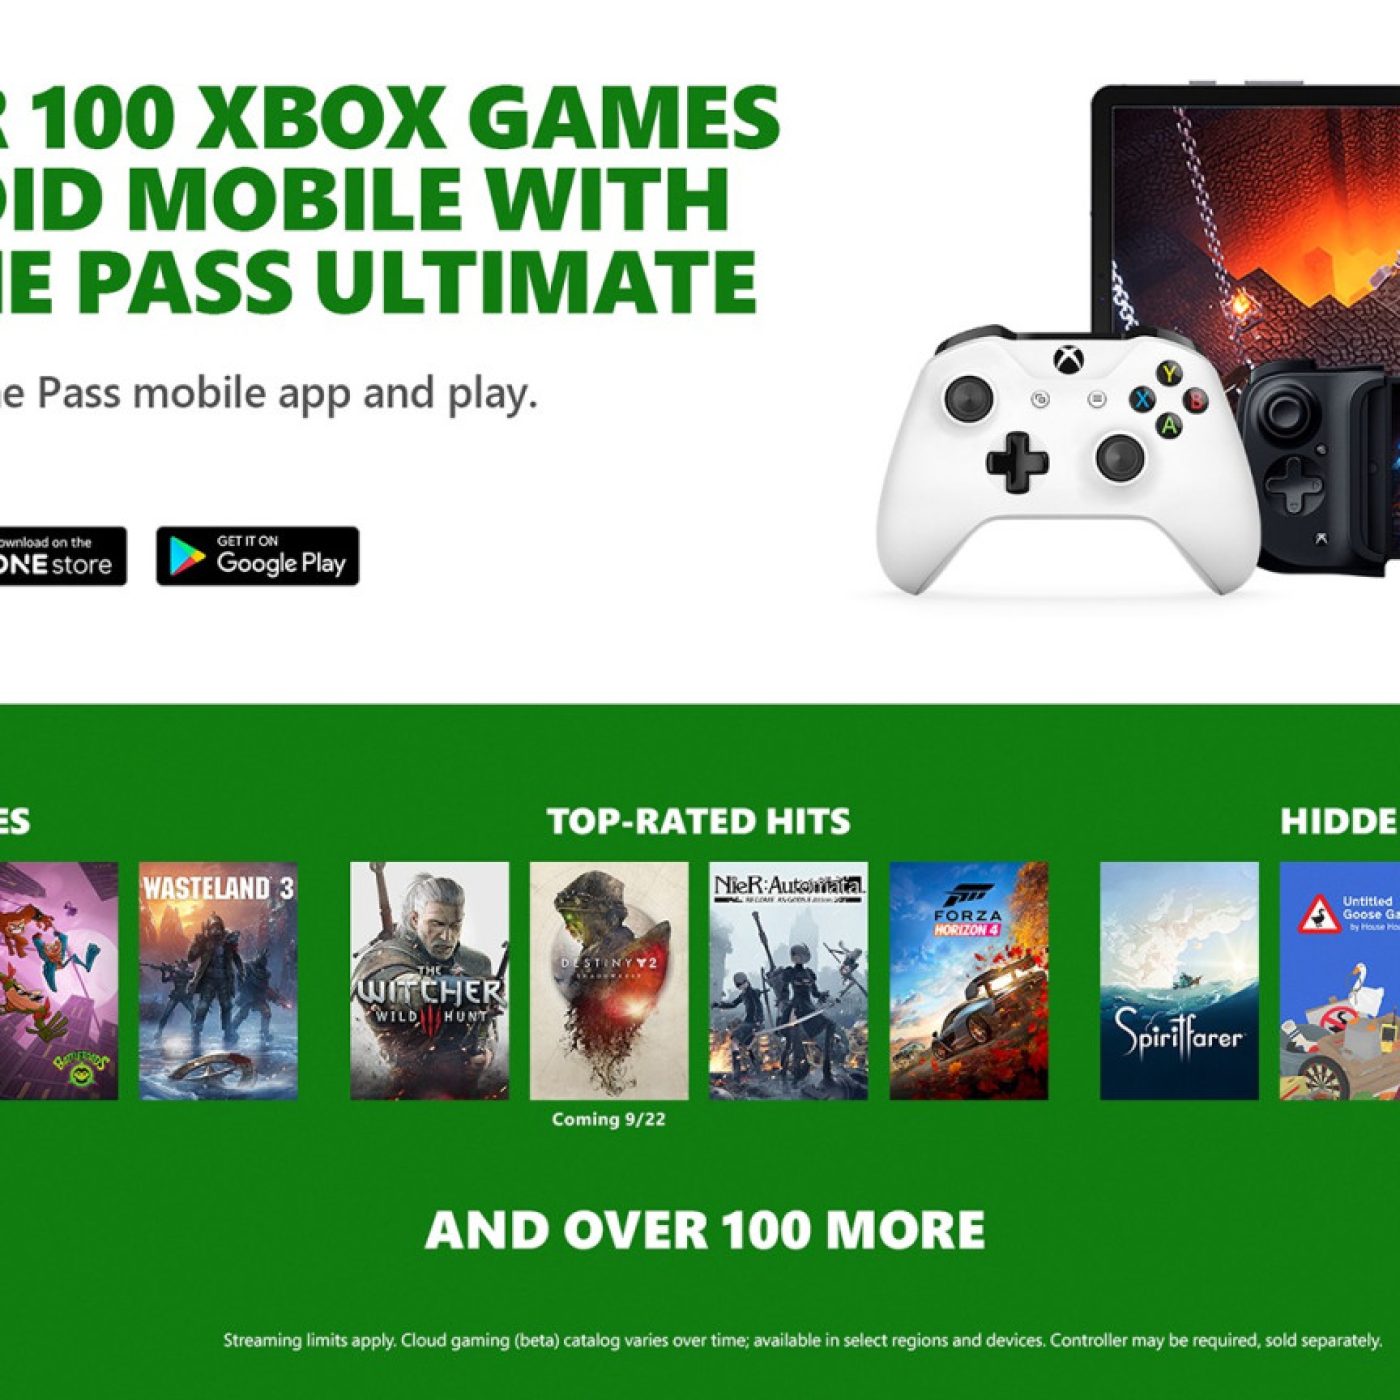 A Plague Tale, Sea Salt, and more join Xbox Game Pass soon